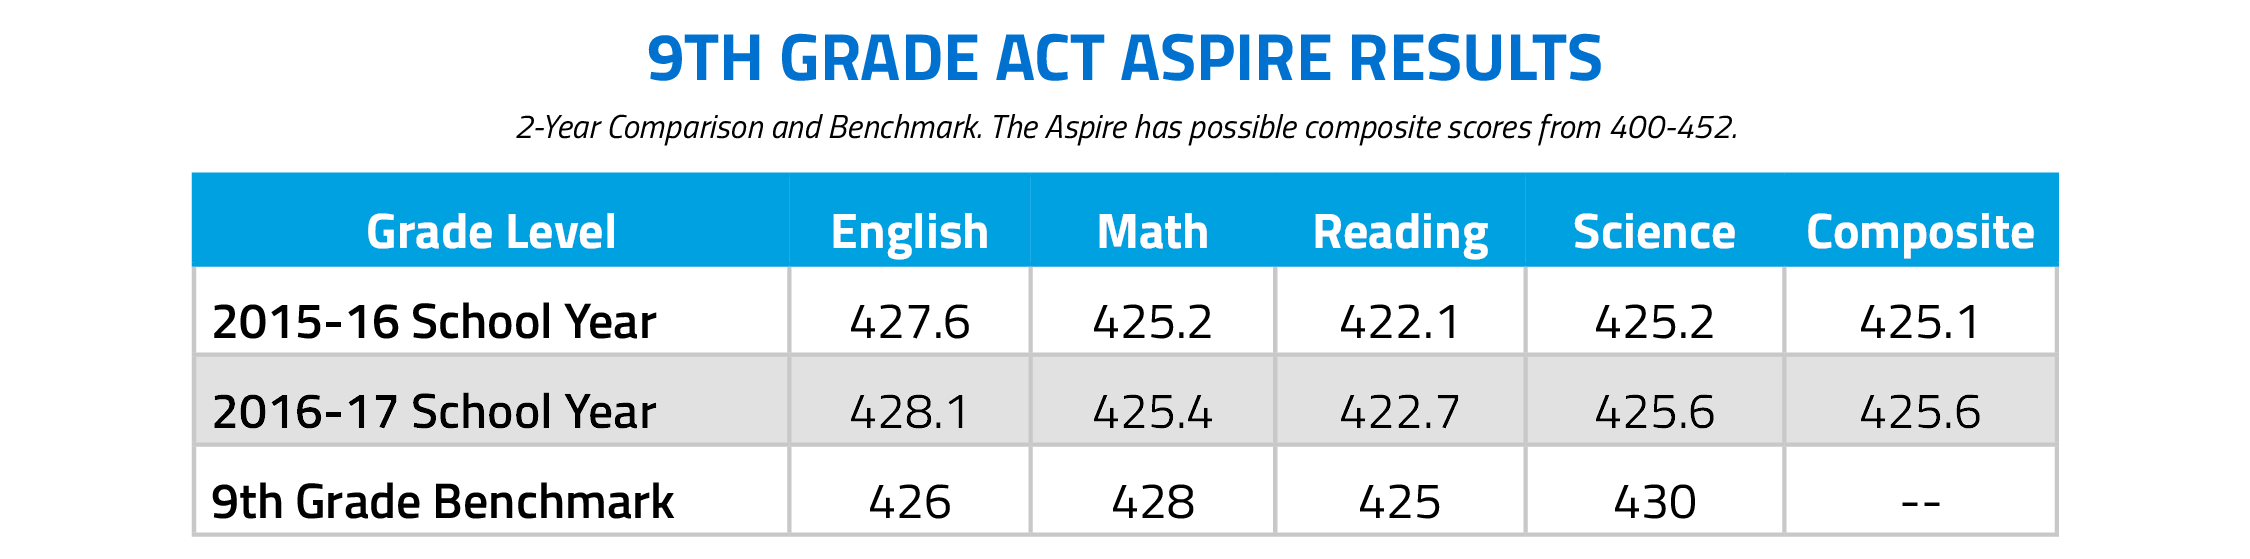 9th Grade ACT Aspire Results. Two-Year comparison and benchmark. The Aspire has possible composite scores from 400-452.